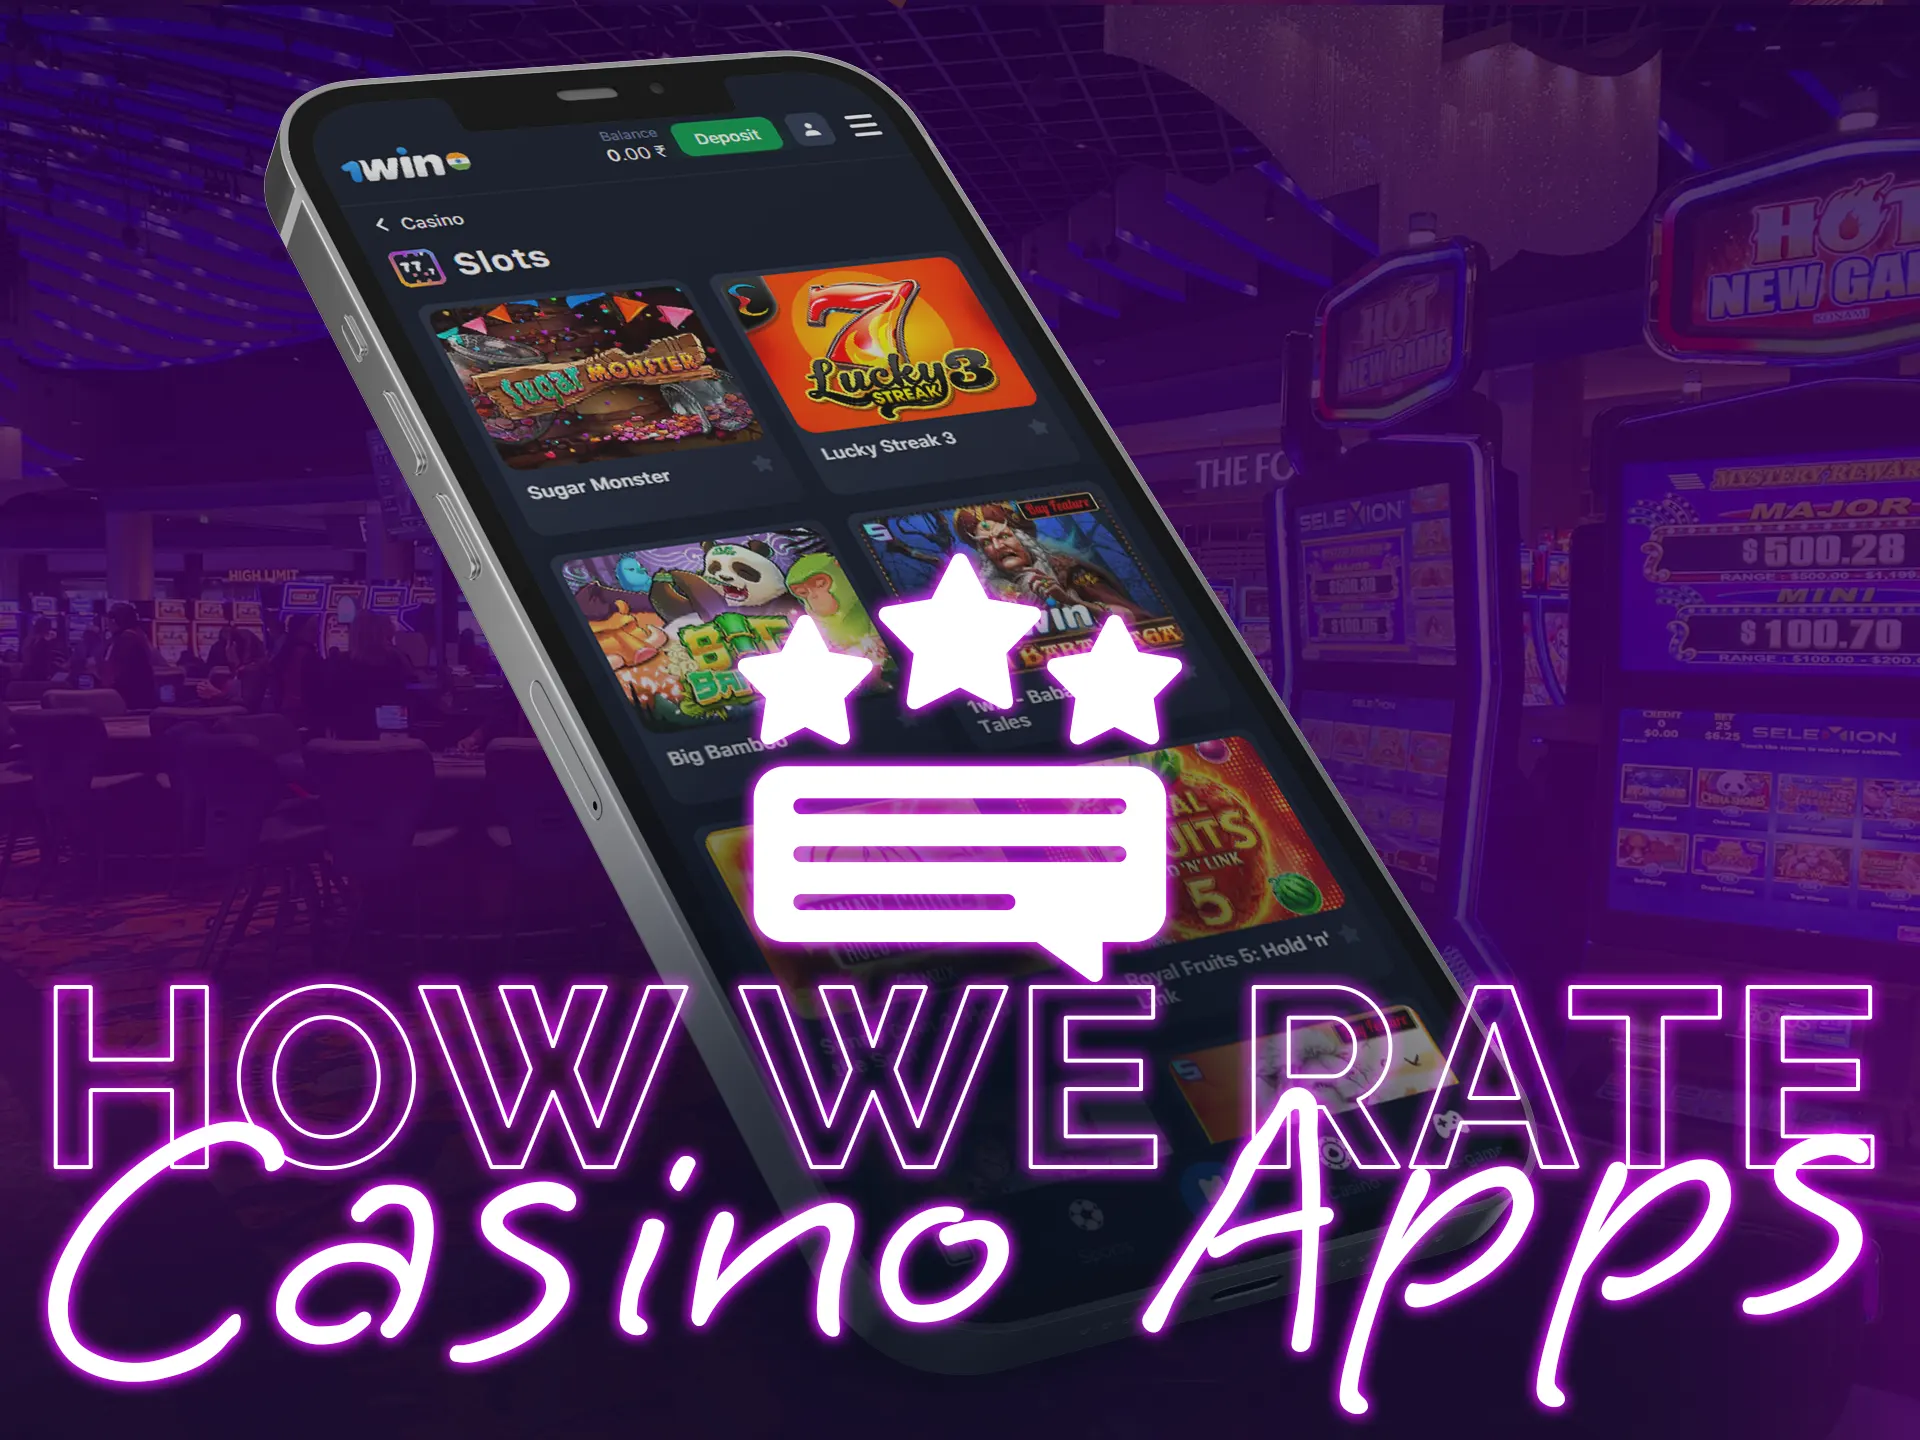 Find out what criteria we use to select the best slots casinos for you in our apps ranking.